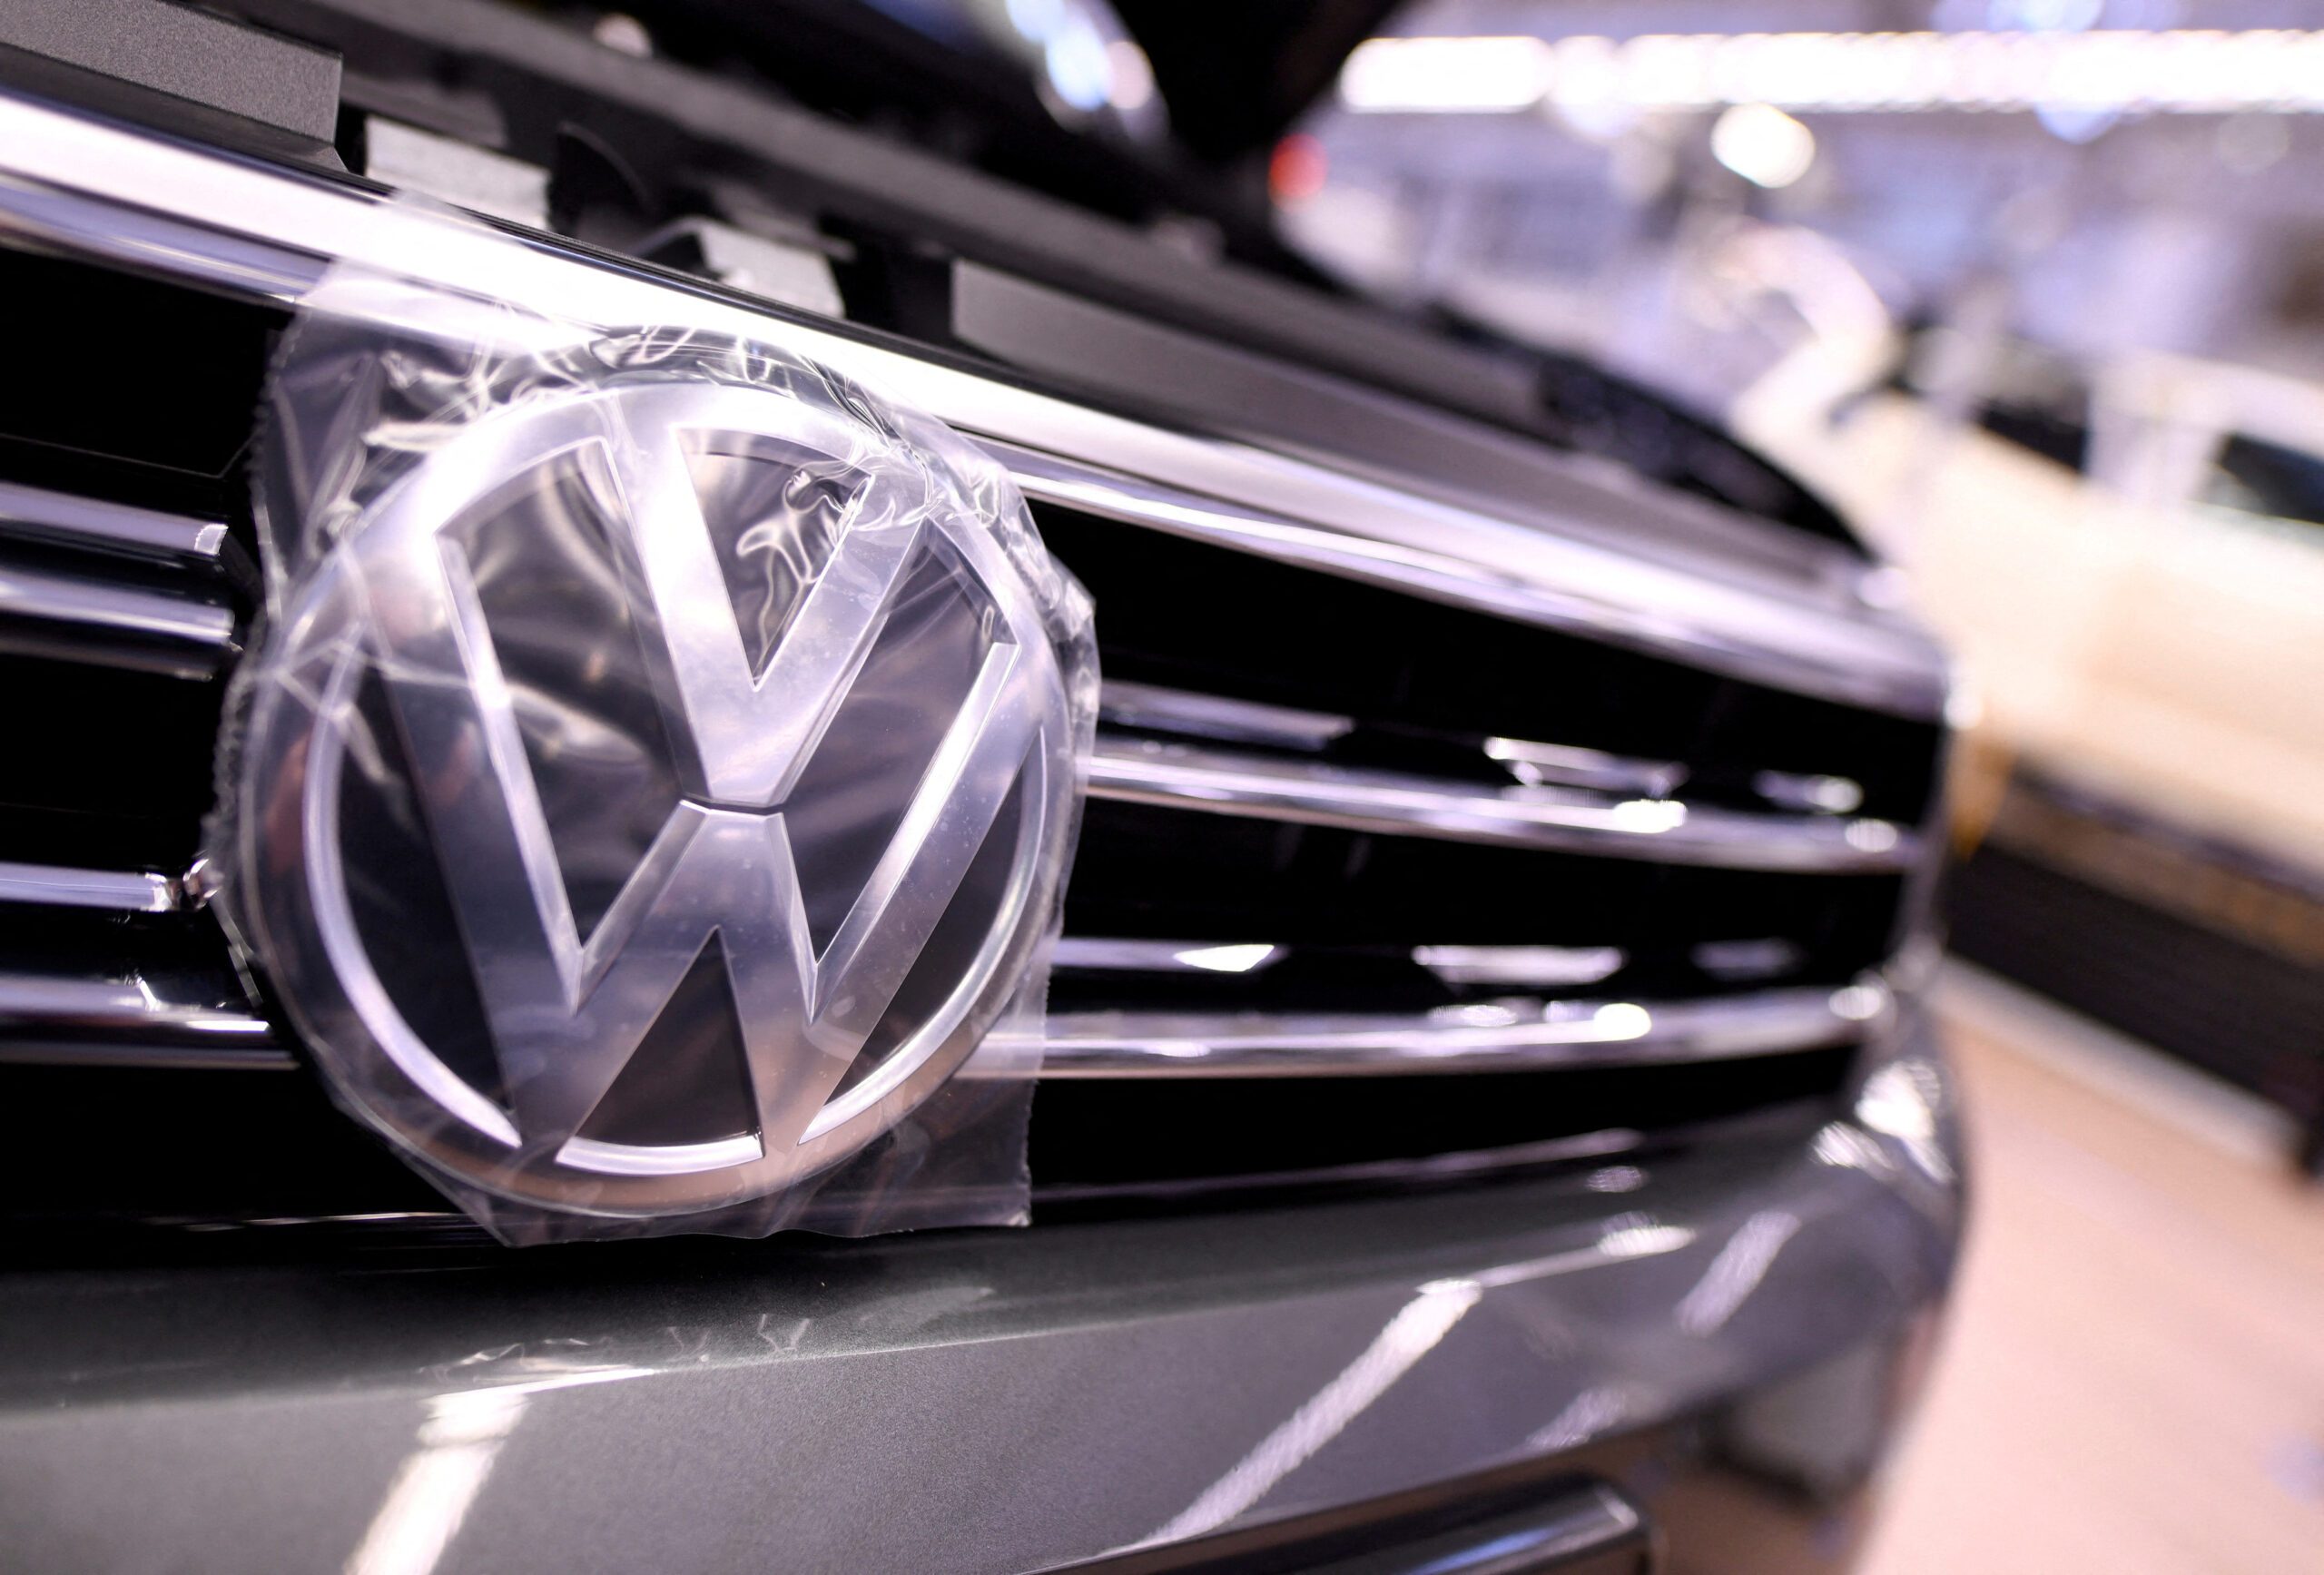 Volkswagen says all brands have halted paid activities on Twitter